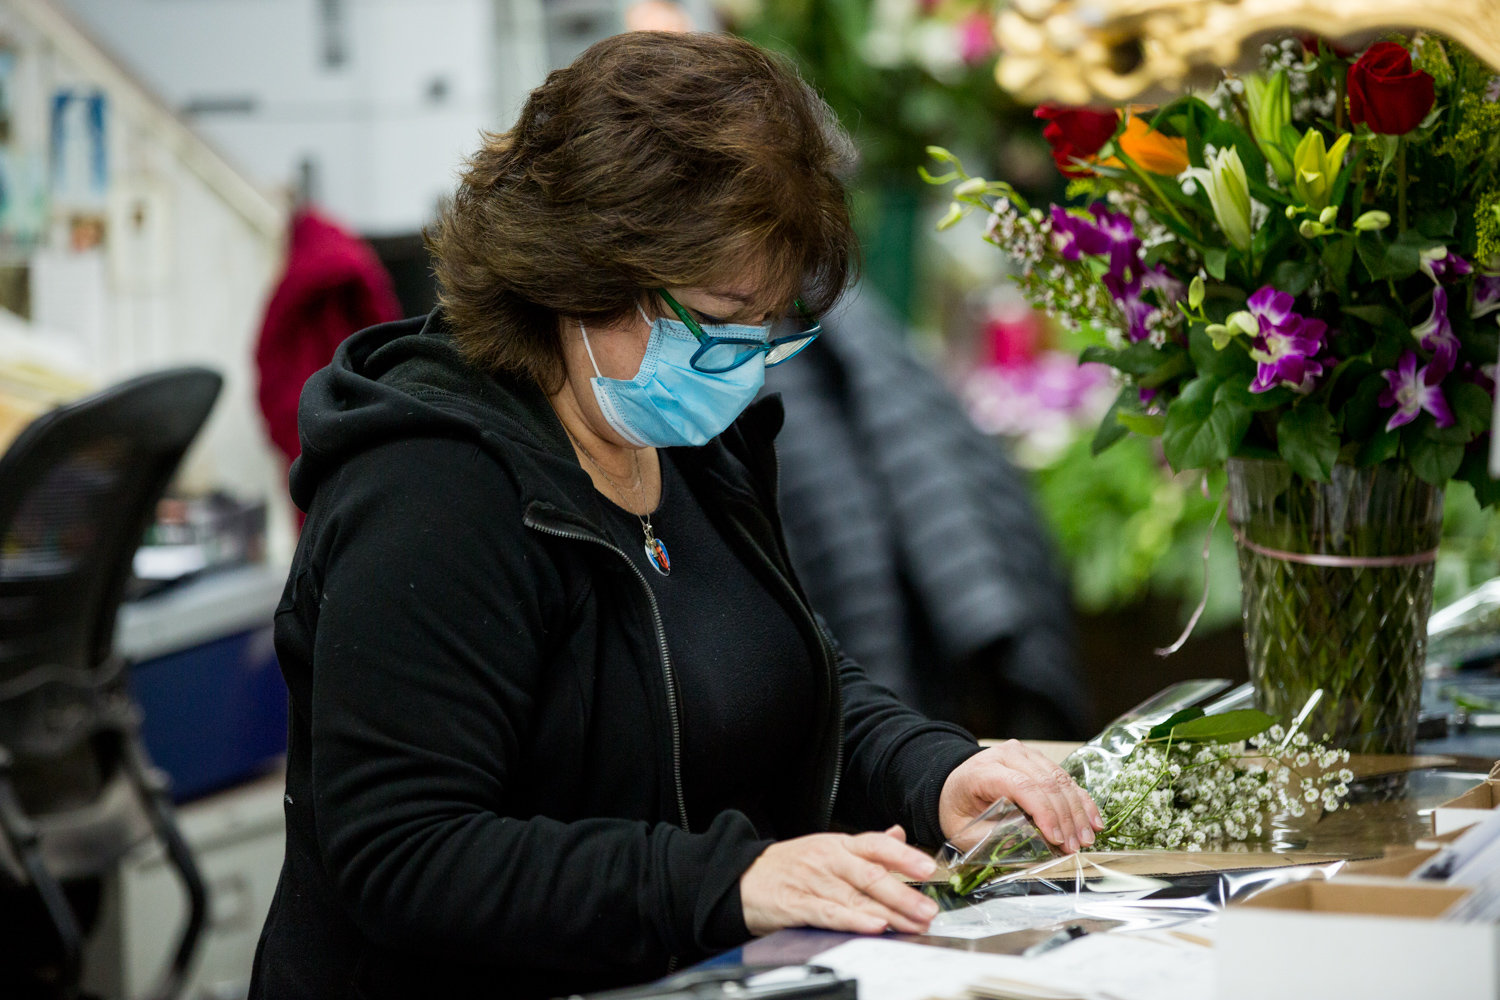 Columbia Florist co-owner Katherine Capsis prepares an order for a customer two days ahead of Mother’s Day. The West 231st Street flower shop has managed to stay open even though many of its neighbors closed temporarily in the wake of the coronavirus pandemic.